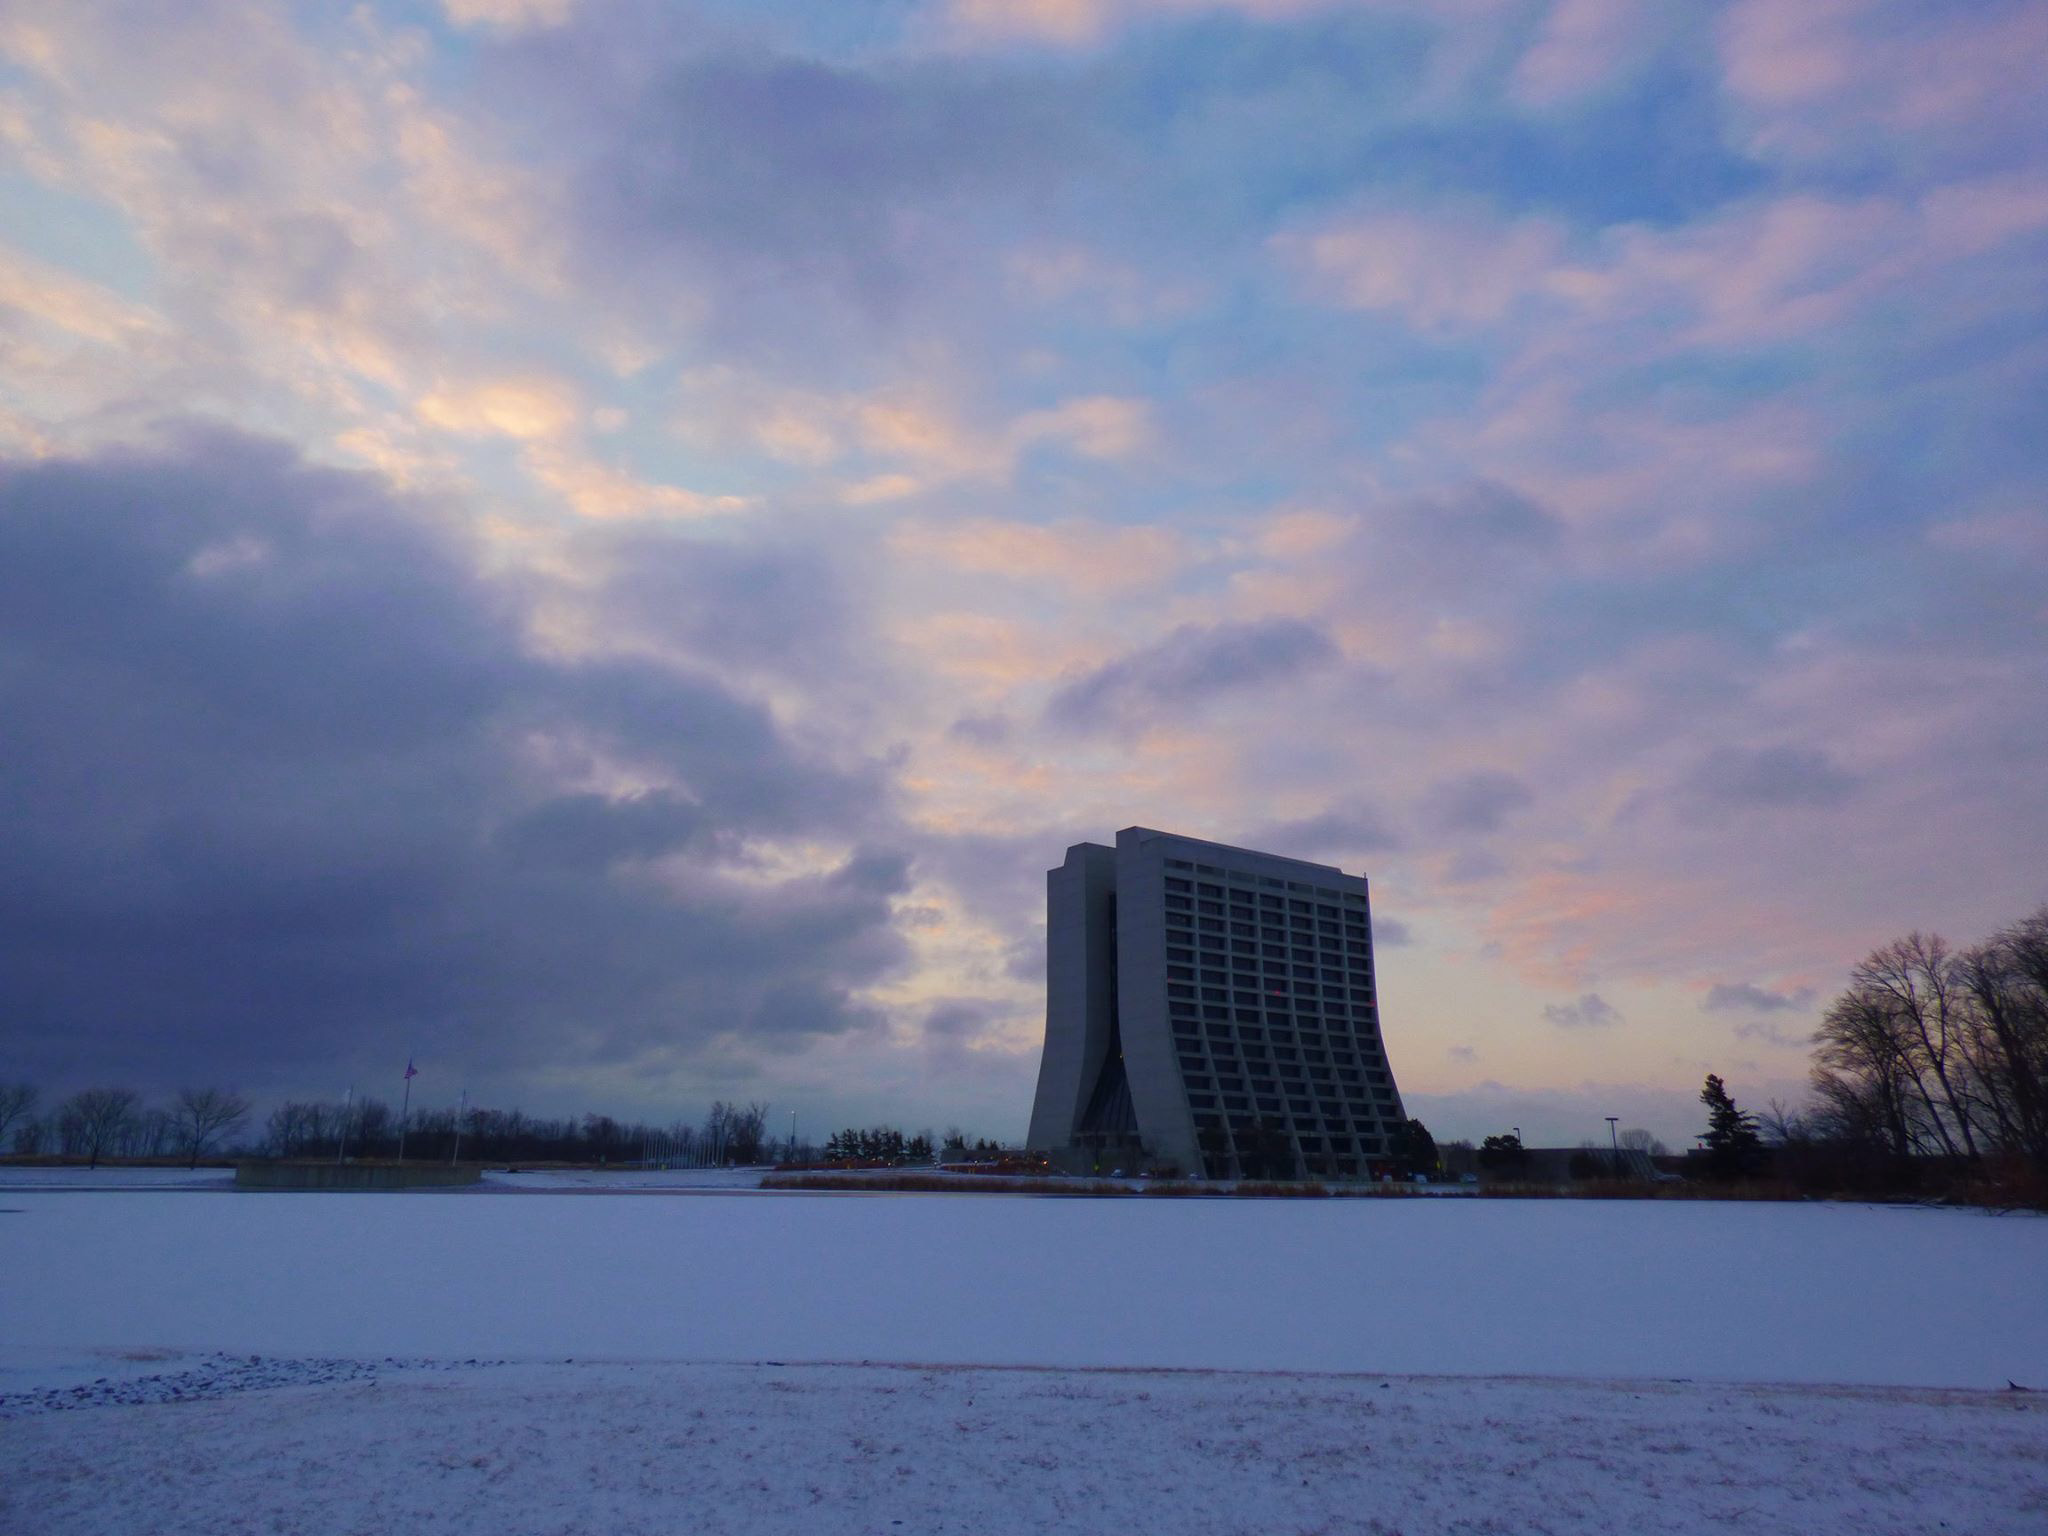 Wilson Hall and its surrounding scene is awash in light lavender light. Photo: Amy Scroggins, landscape, building, winter, snow, sky, cloud